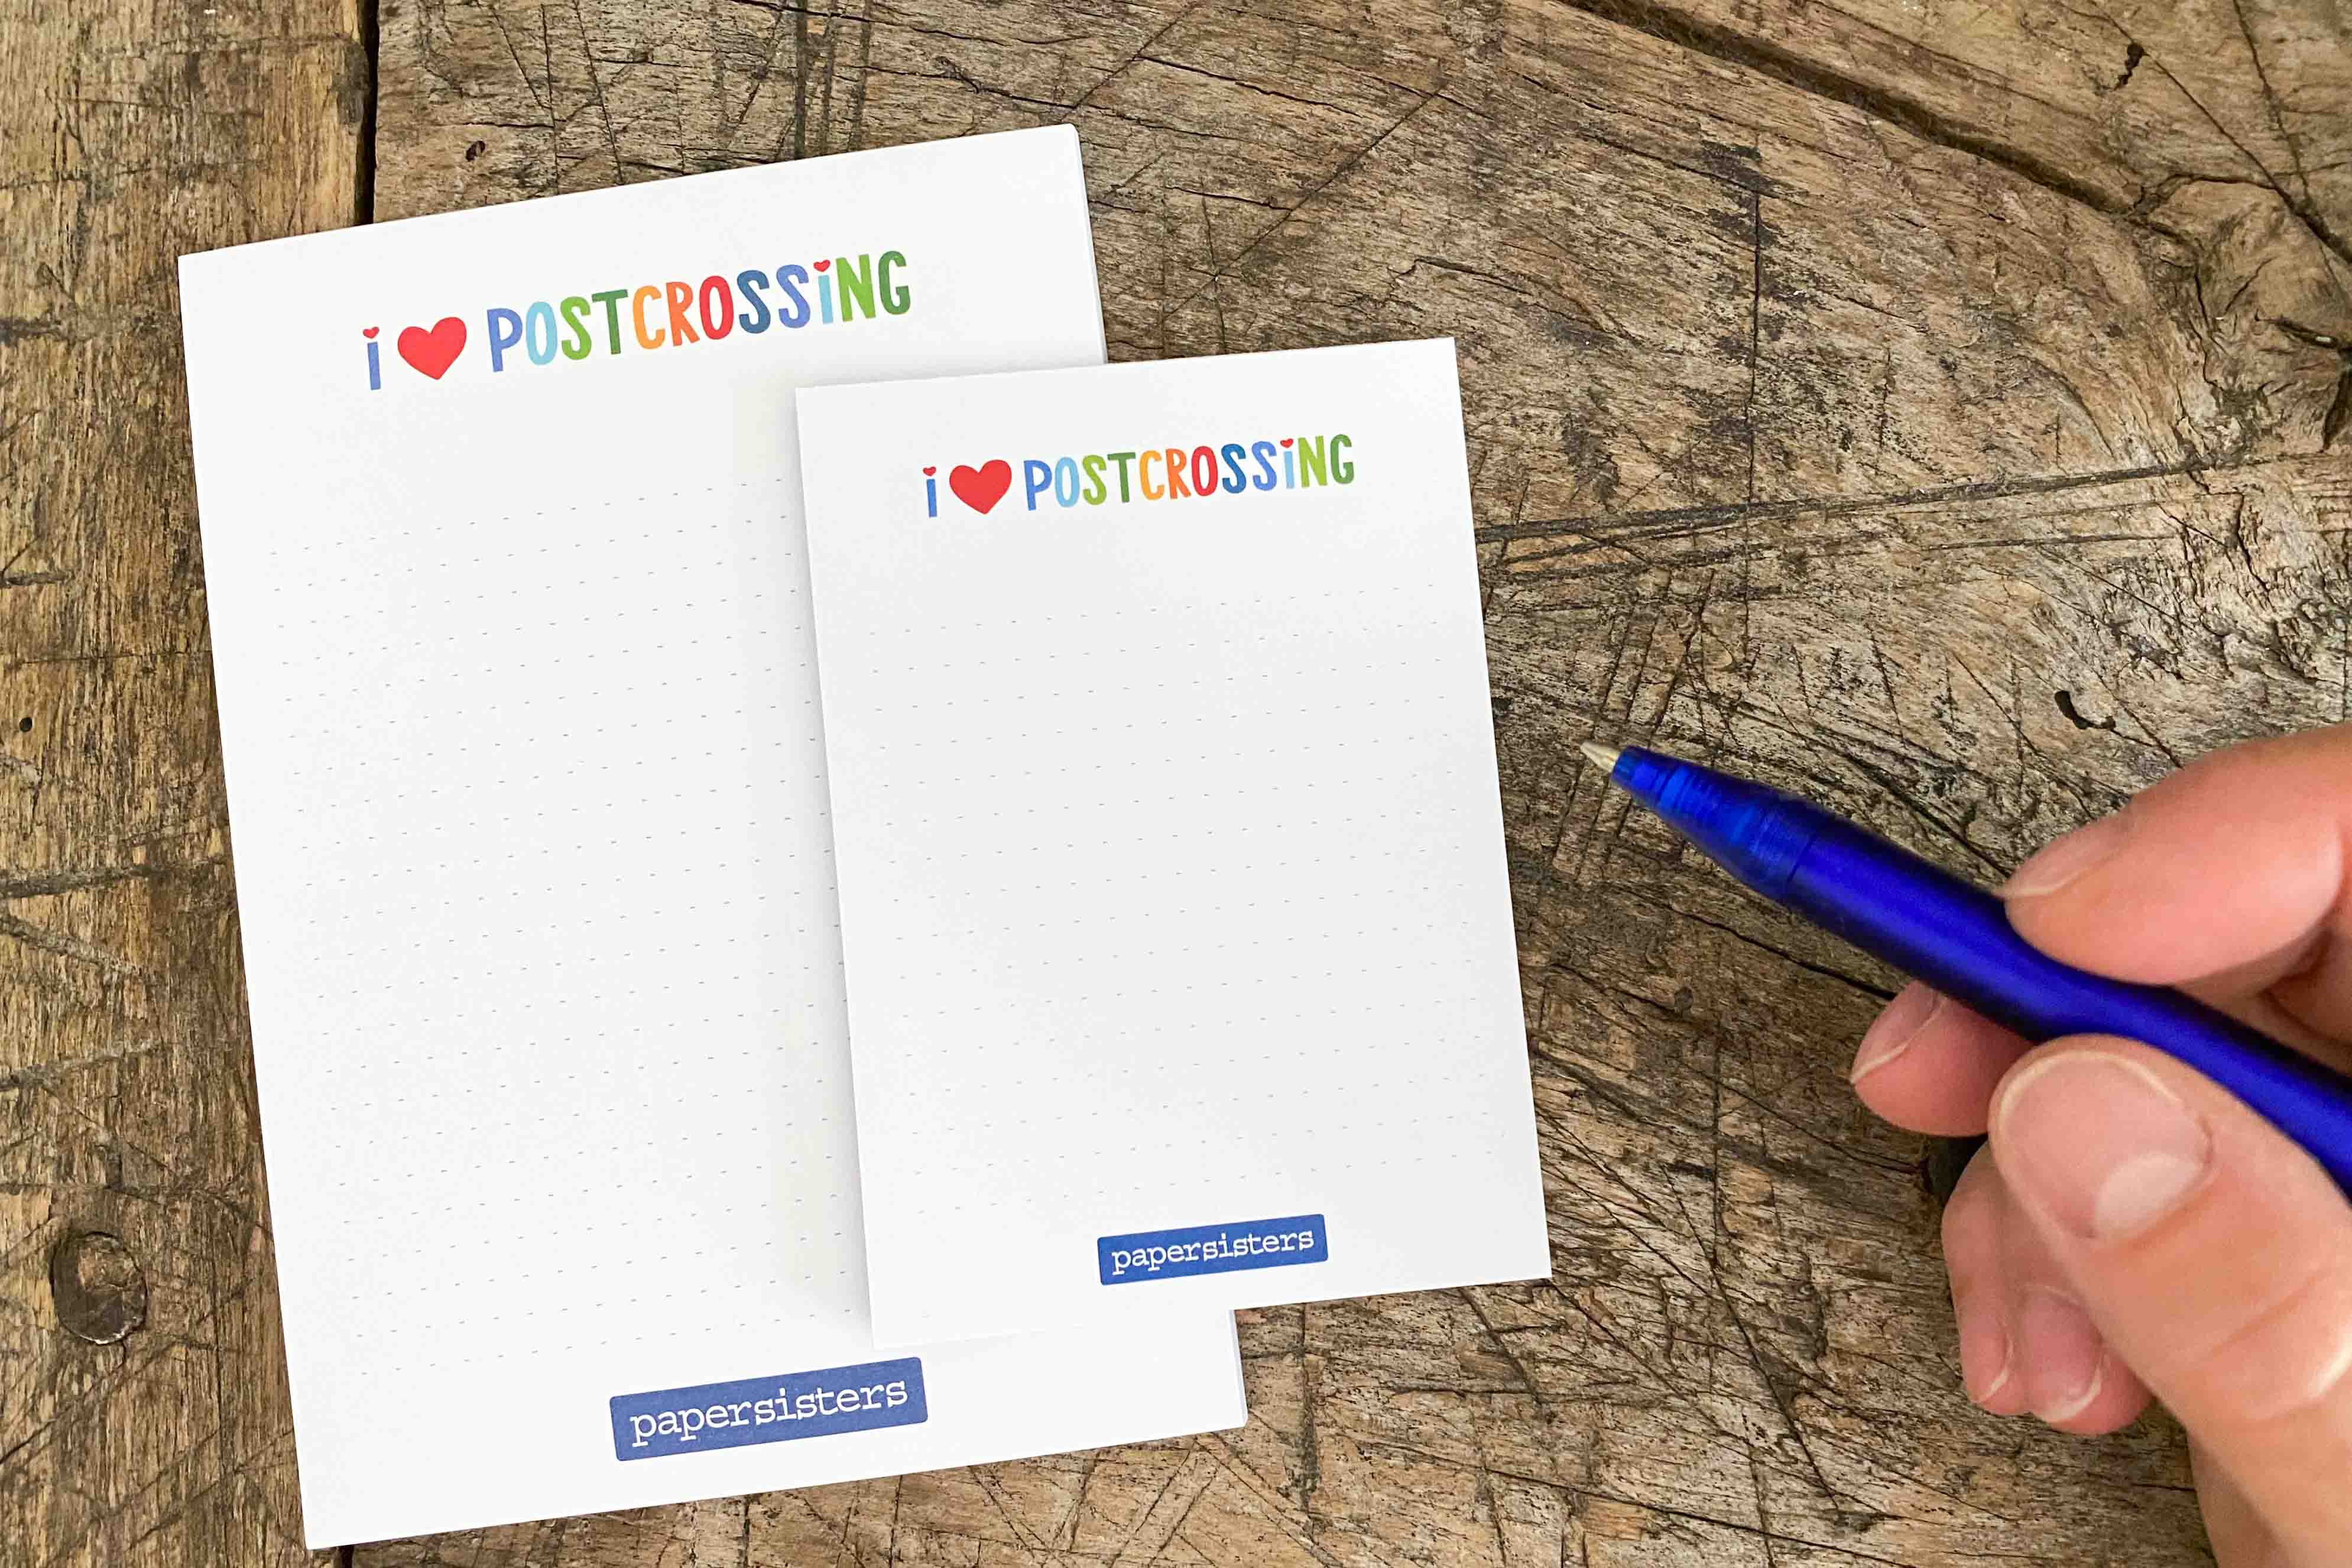 Notepad Duo "I love Postcrossing" small and large